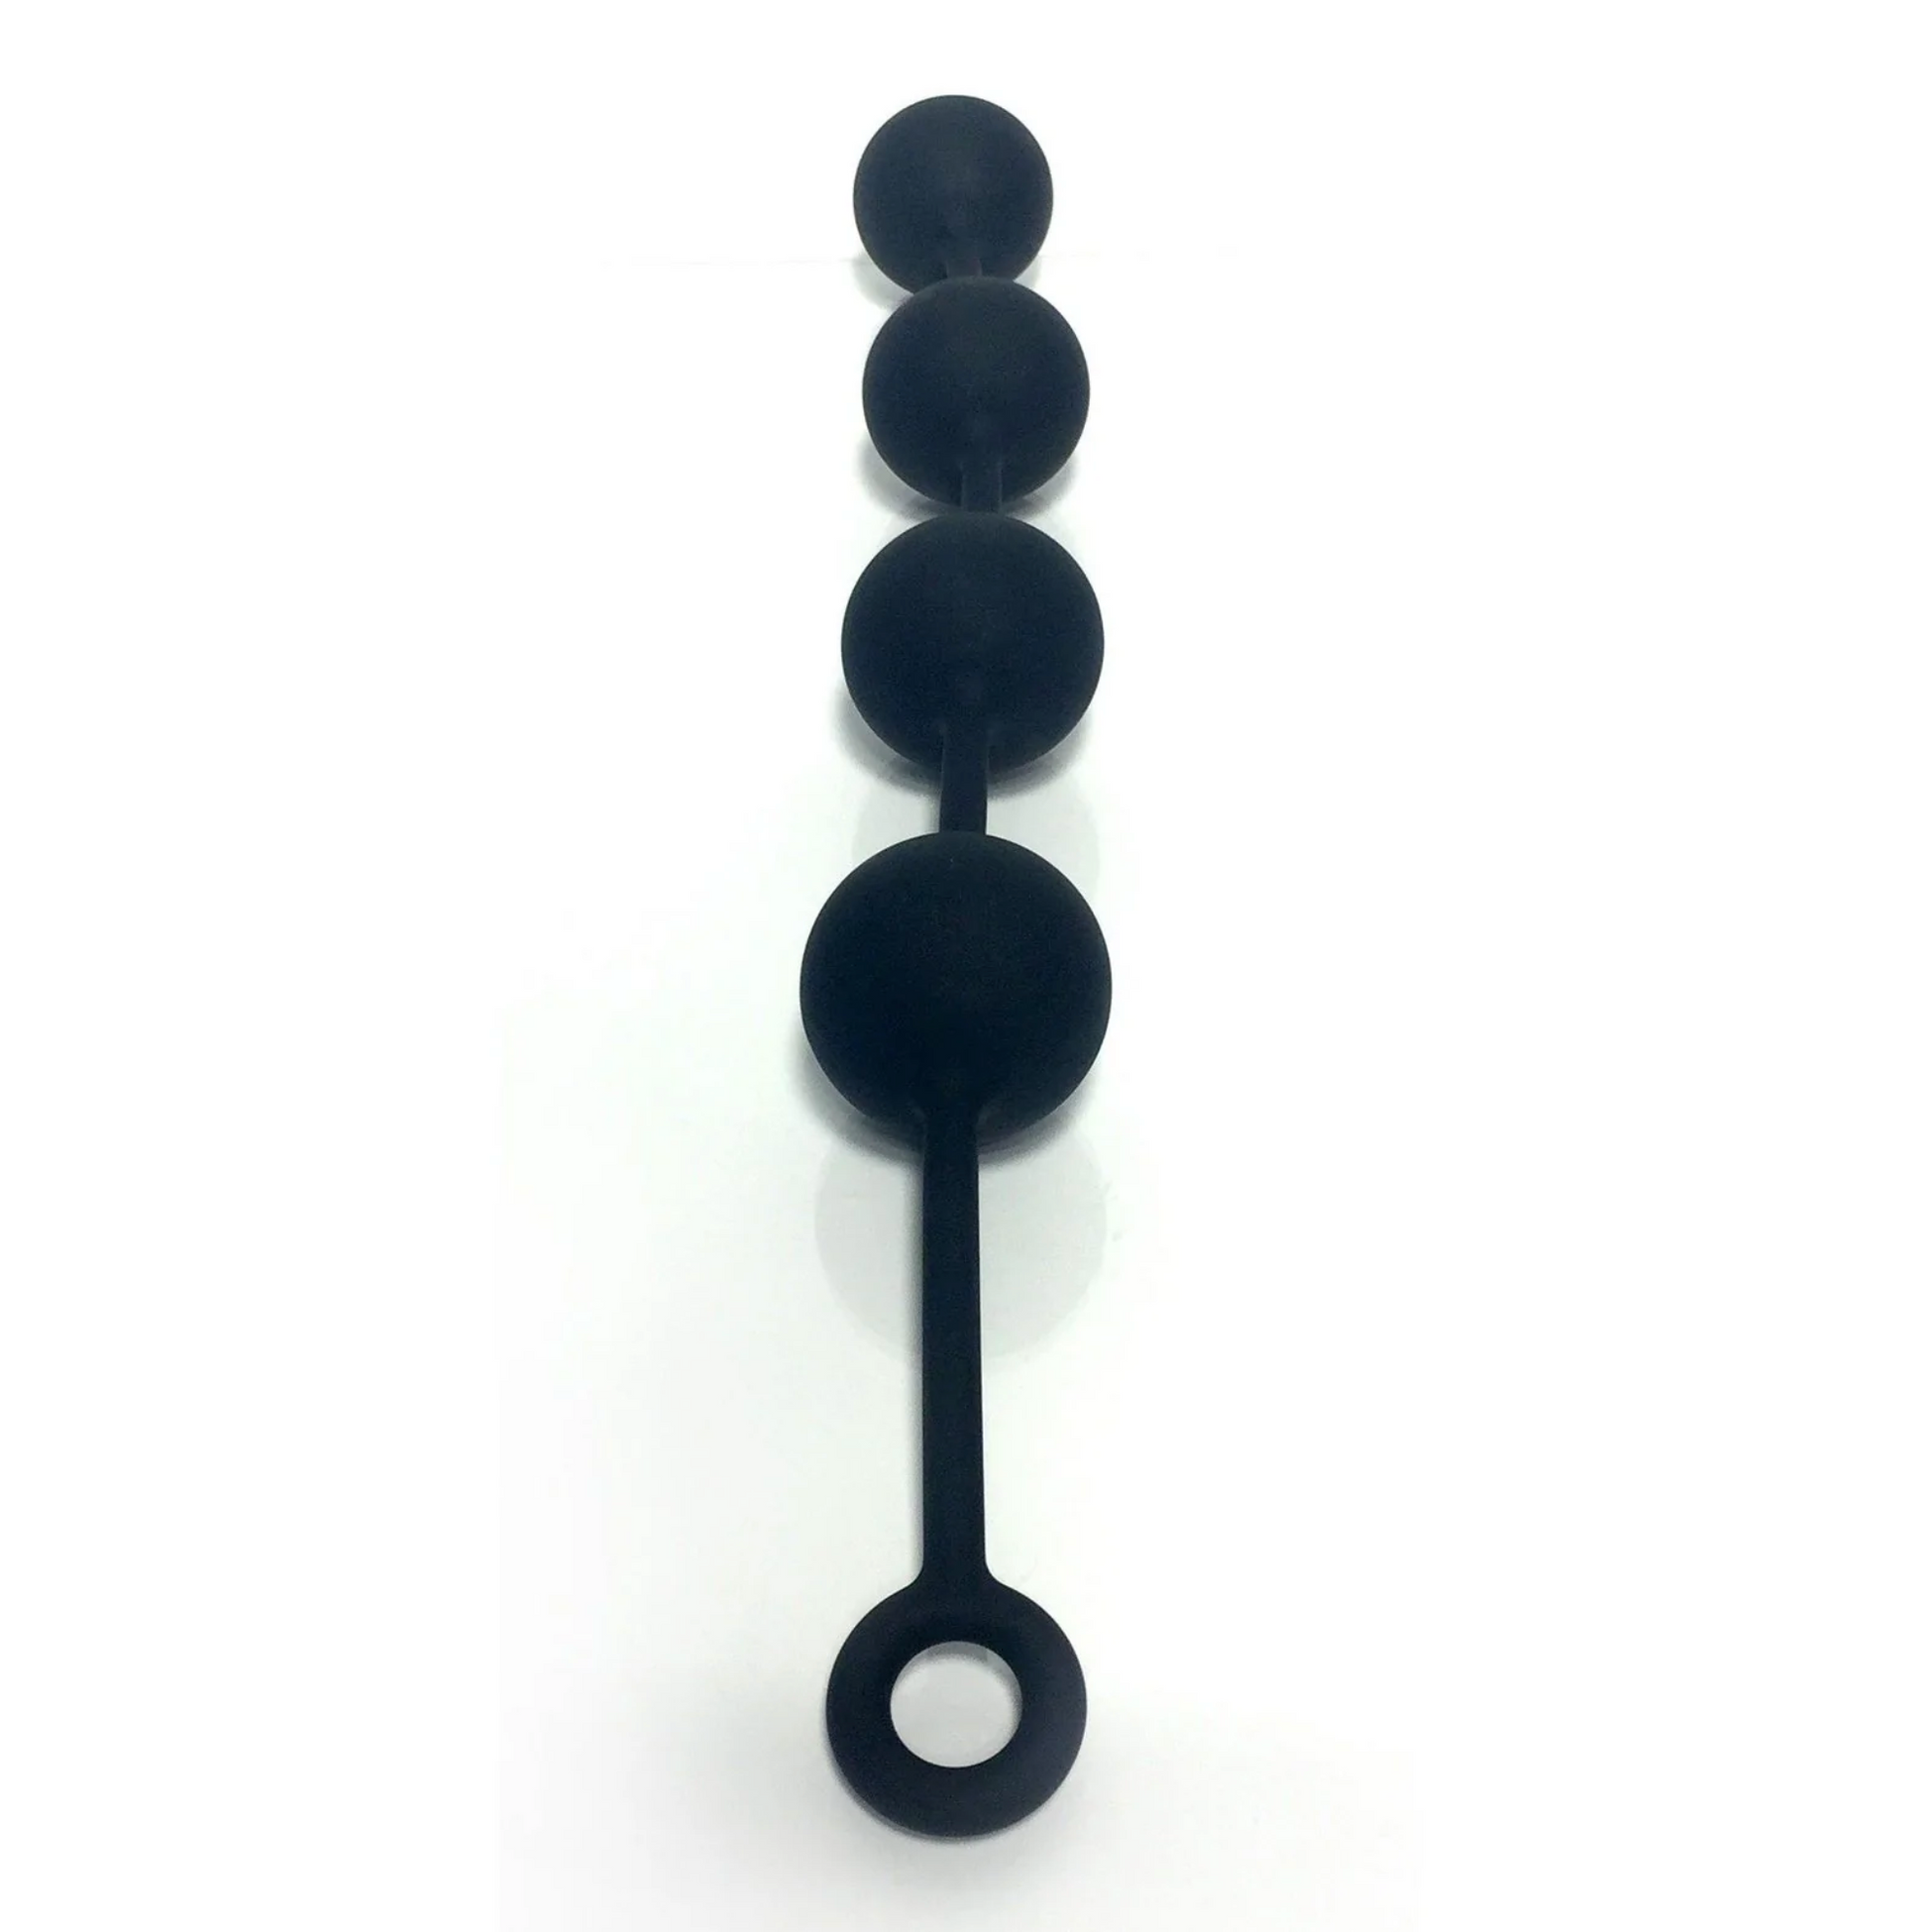 Four black silicone balls on a thin line, all seamless in one piece, with a loop in the handle.